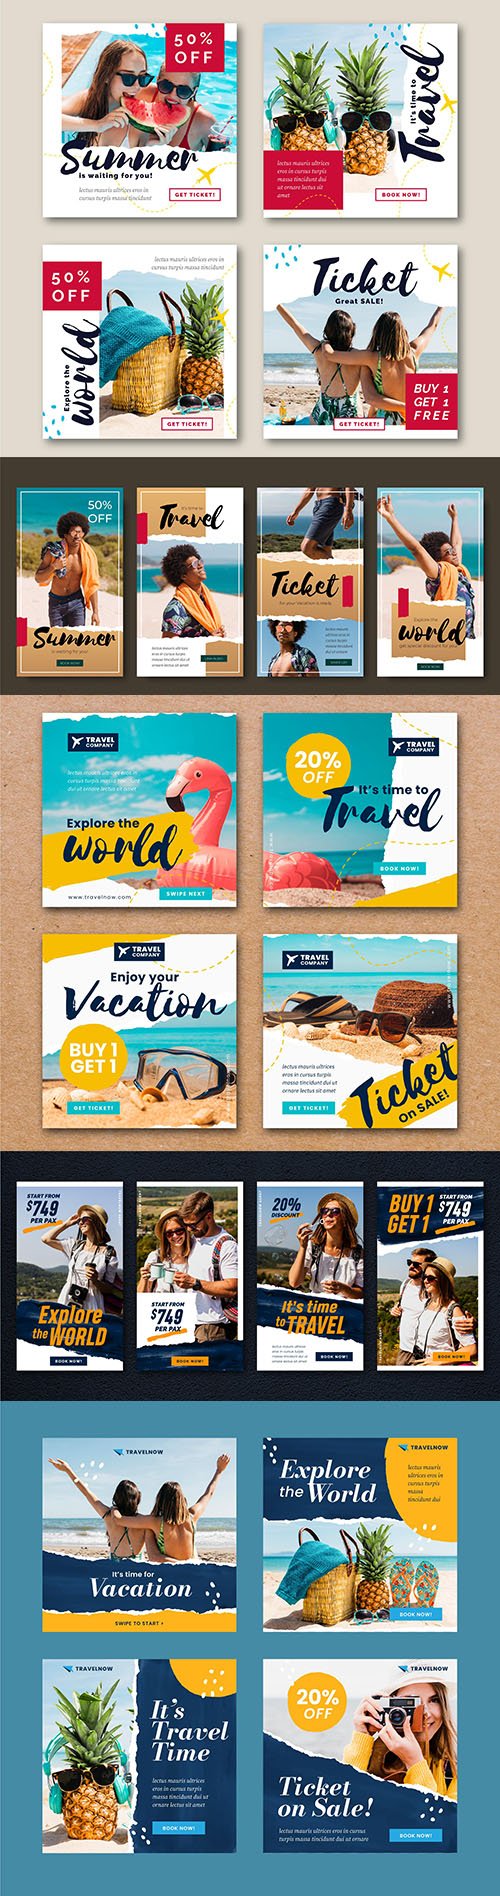 Travel story and travel sale instagram post template